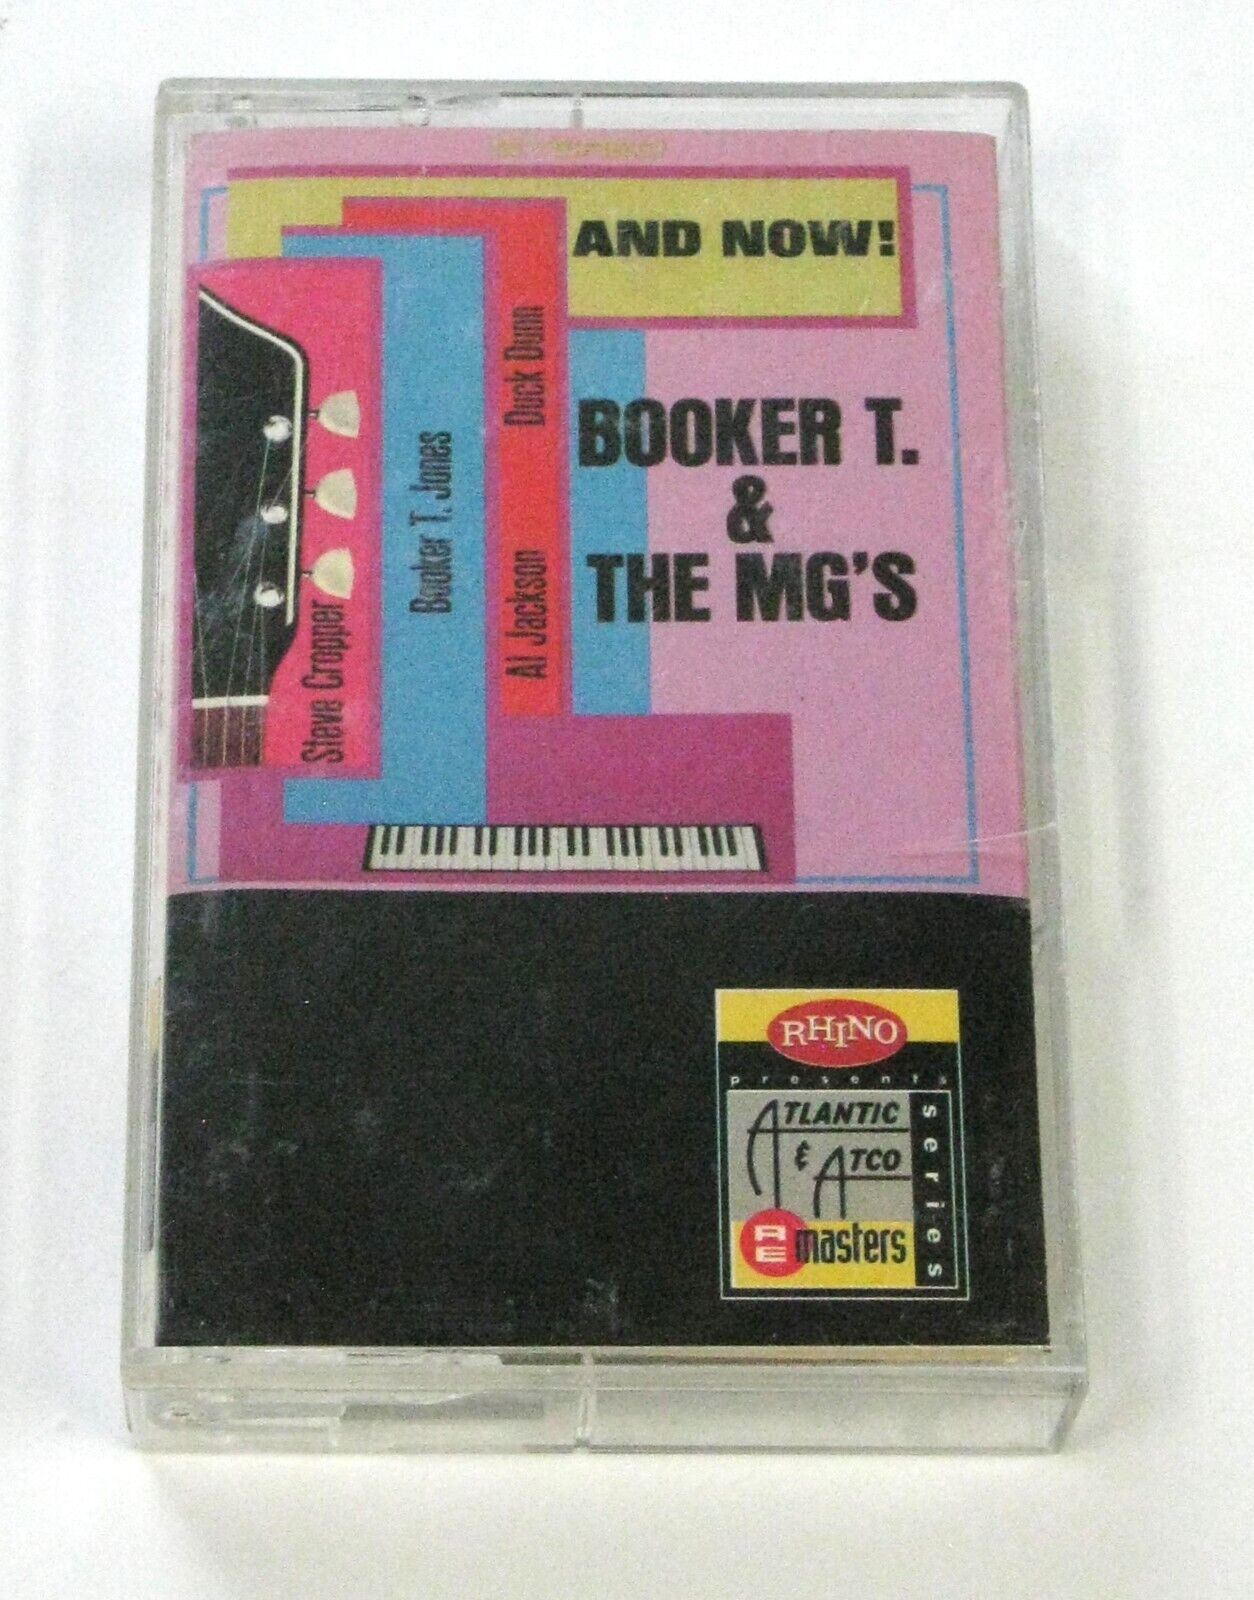 1966 Vintage Cassette Tape Booker T.  & The Mg\'s And Now Atlantic Records